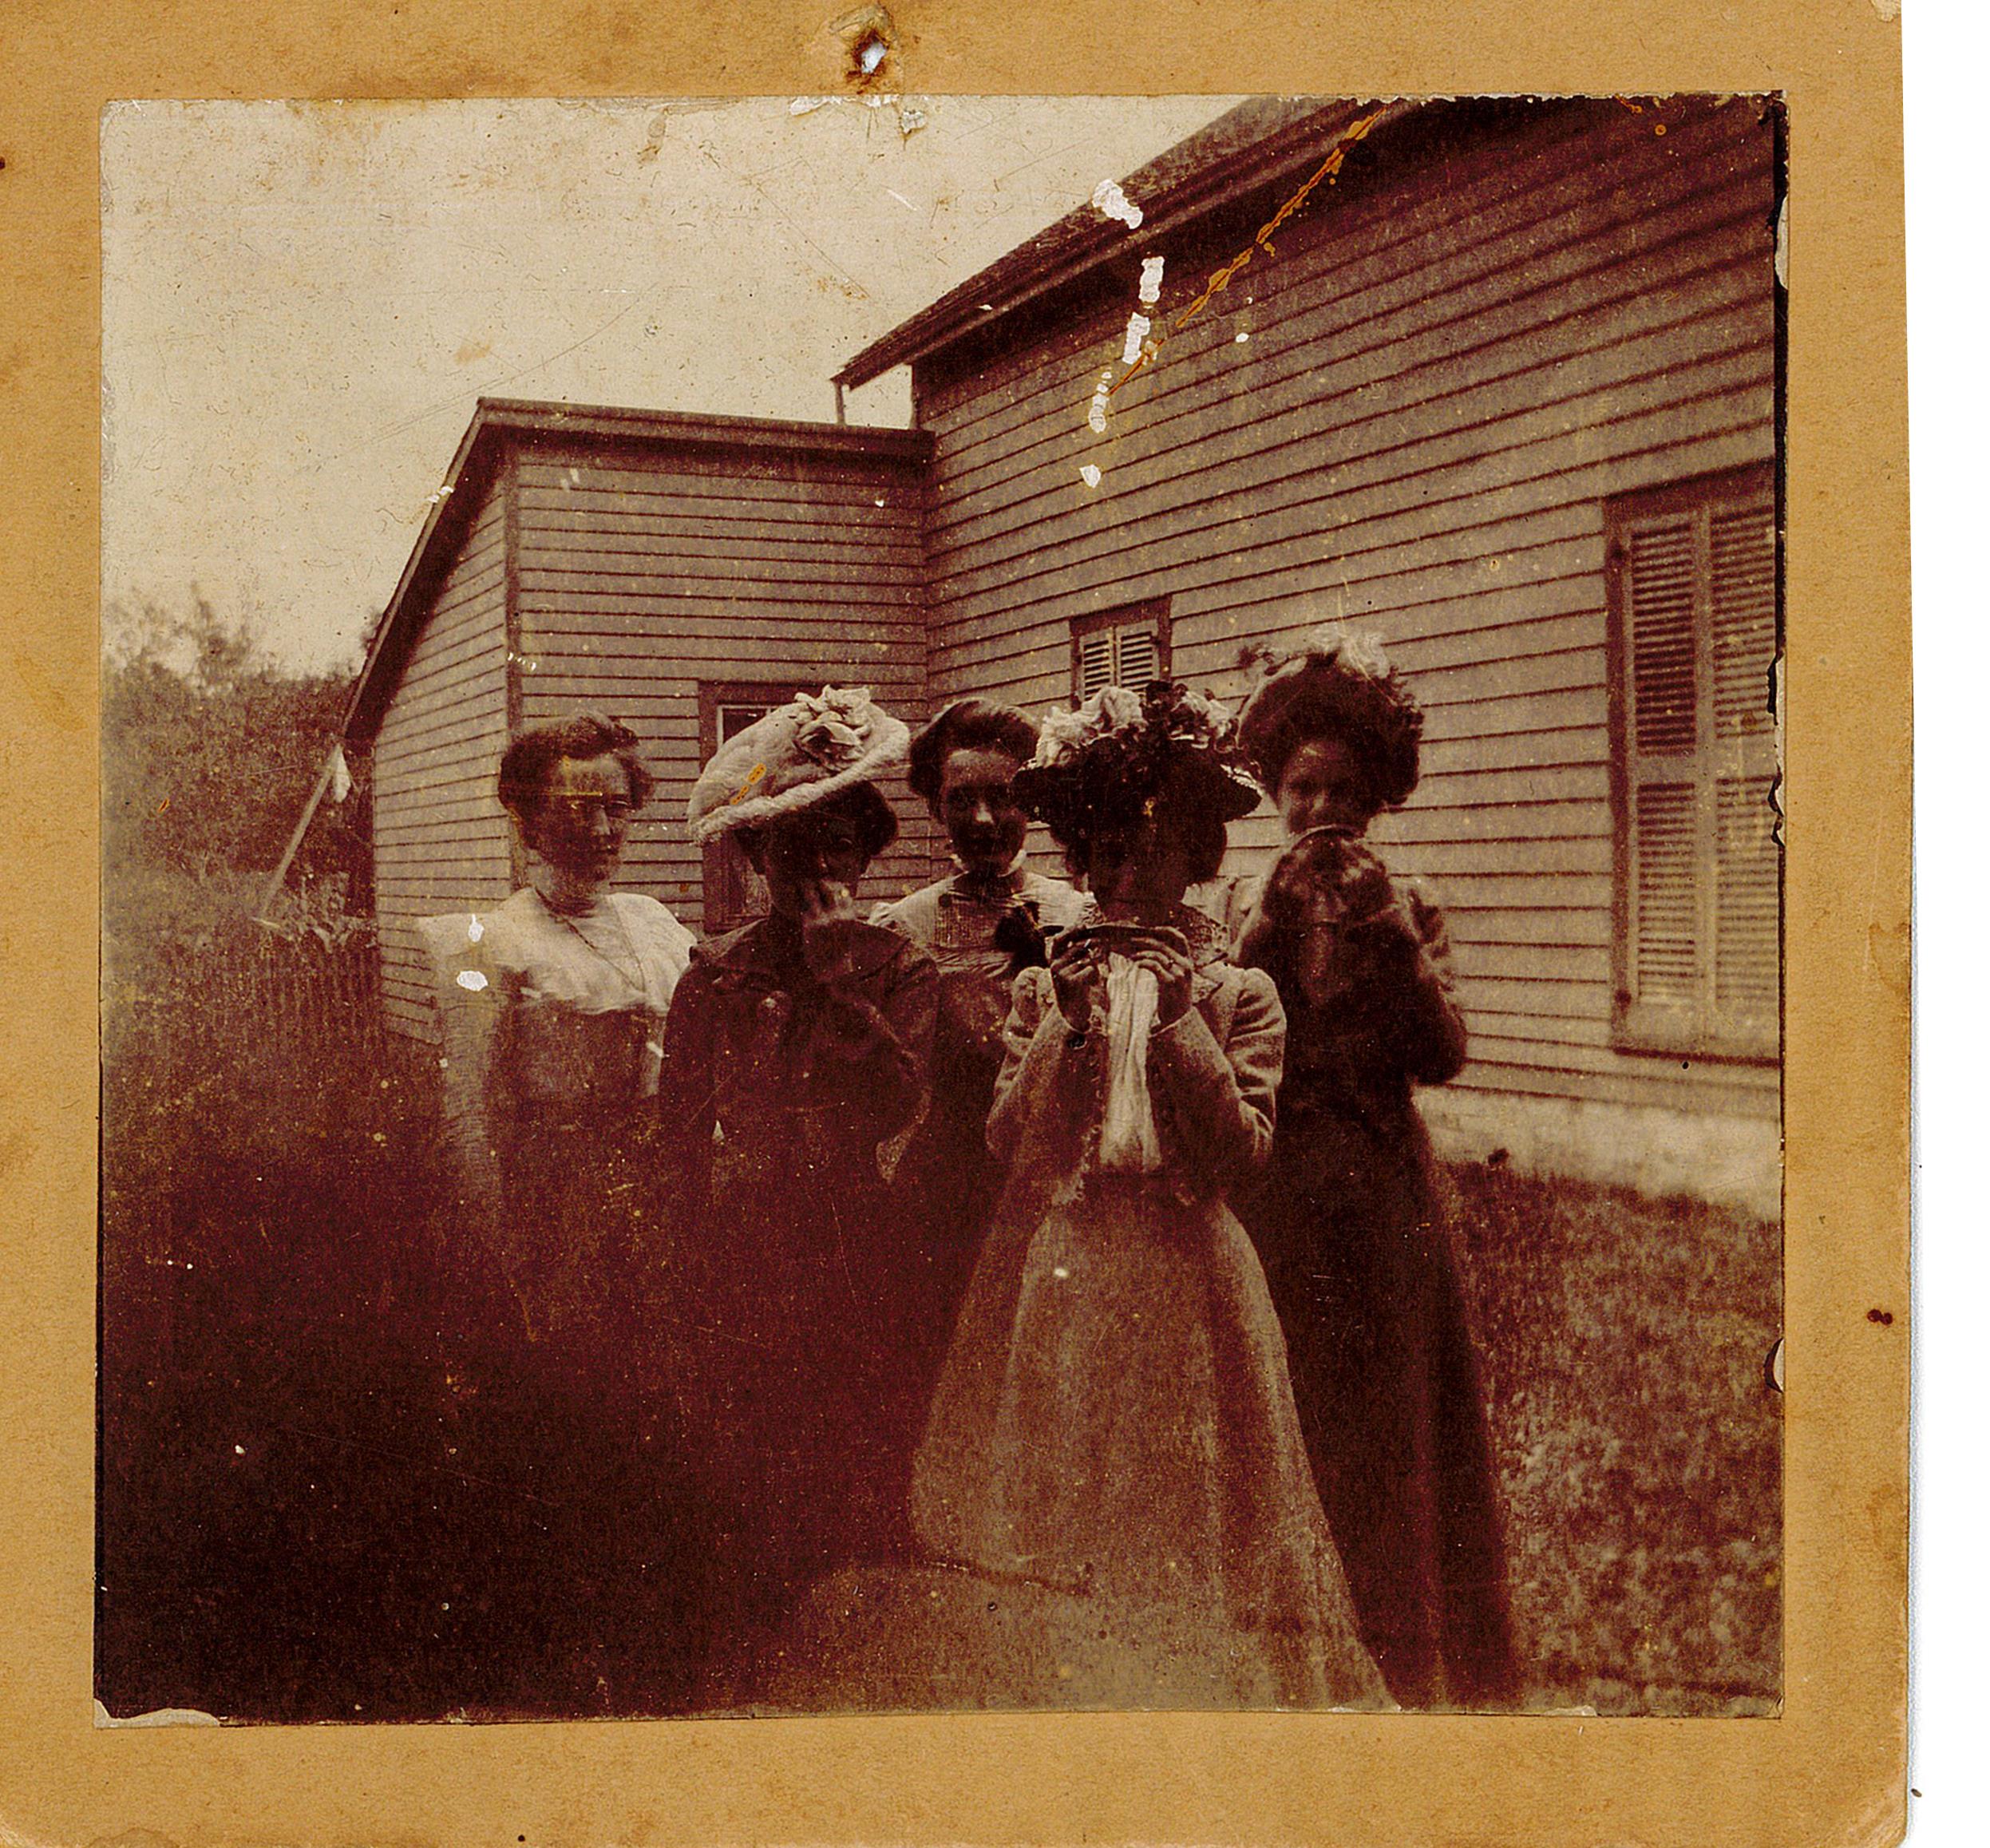 Five ladies posing in front of a wood frame building, wearing long dresses and fancy hats.